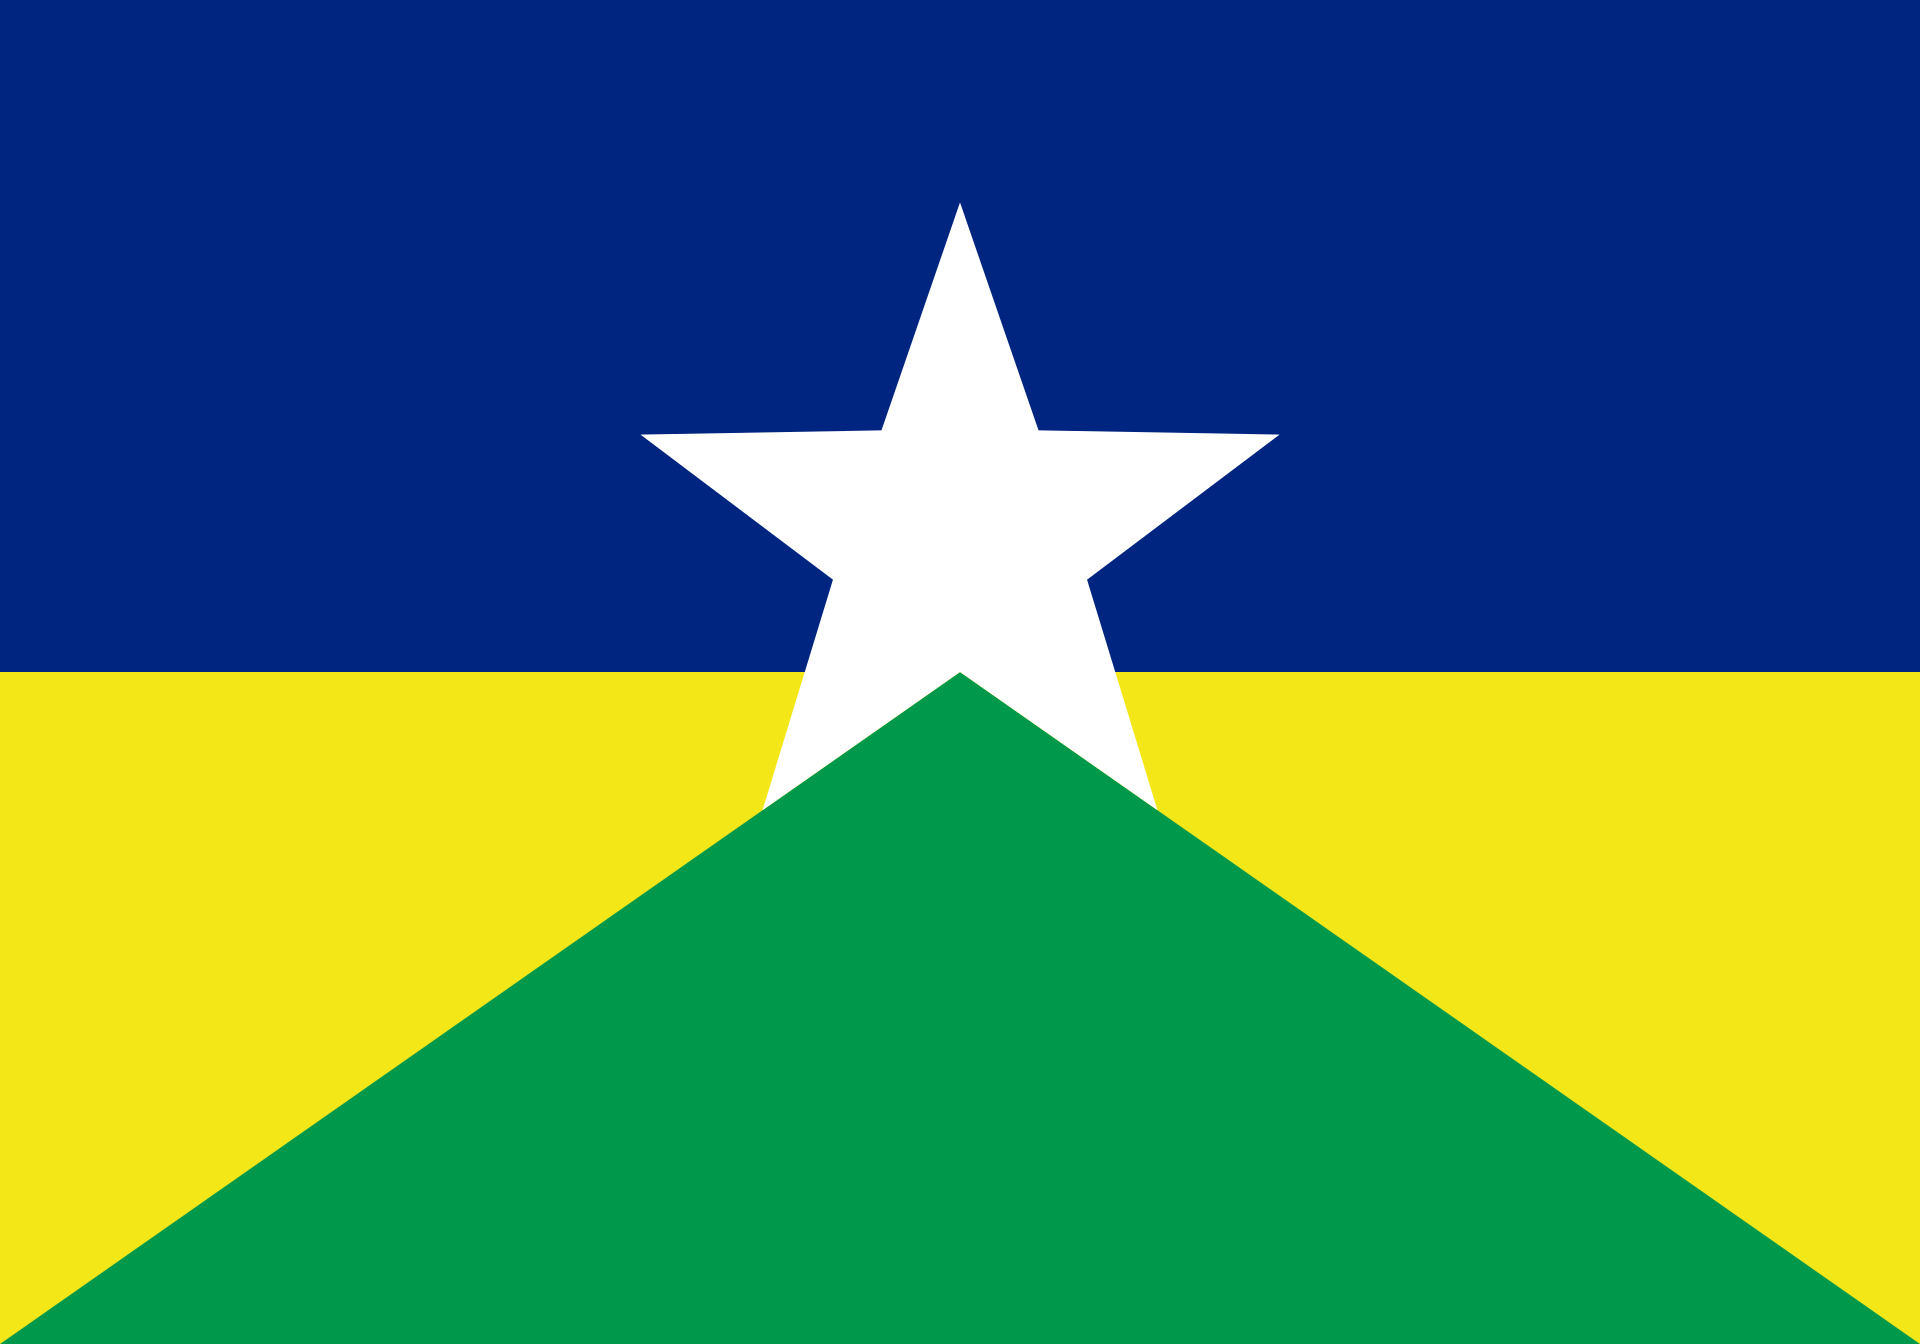 Brazilian State Flags Quiz - By lhz